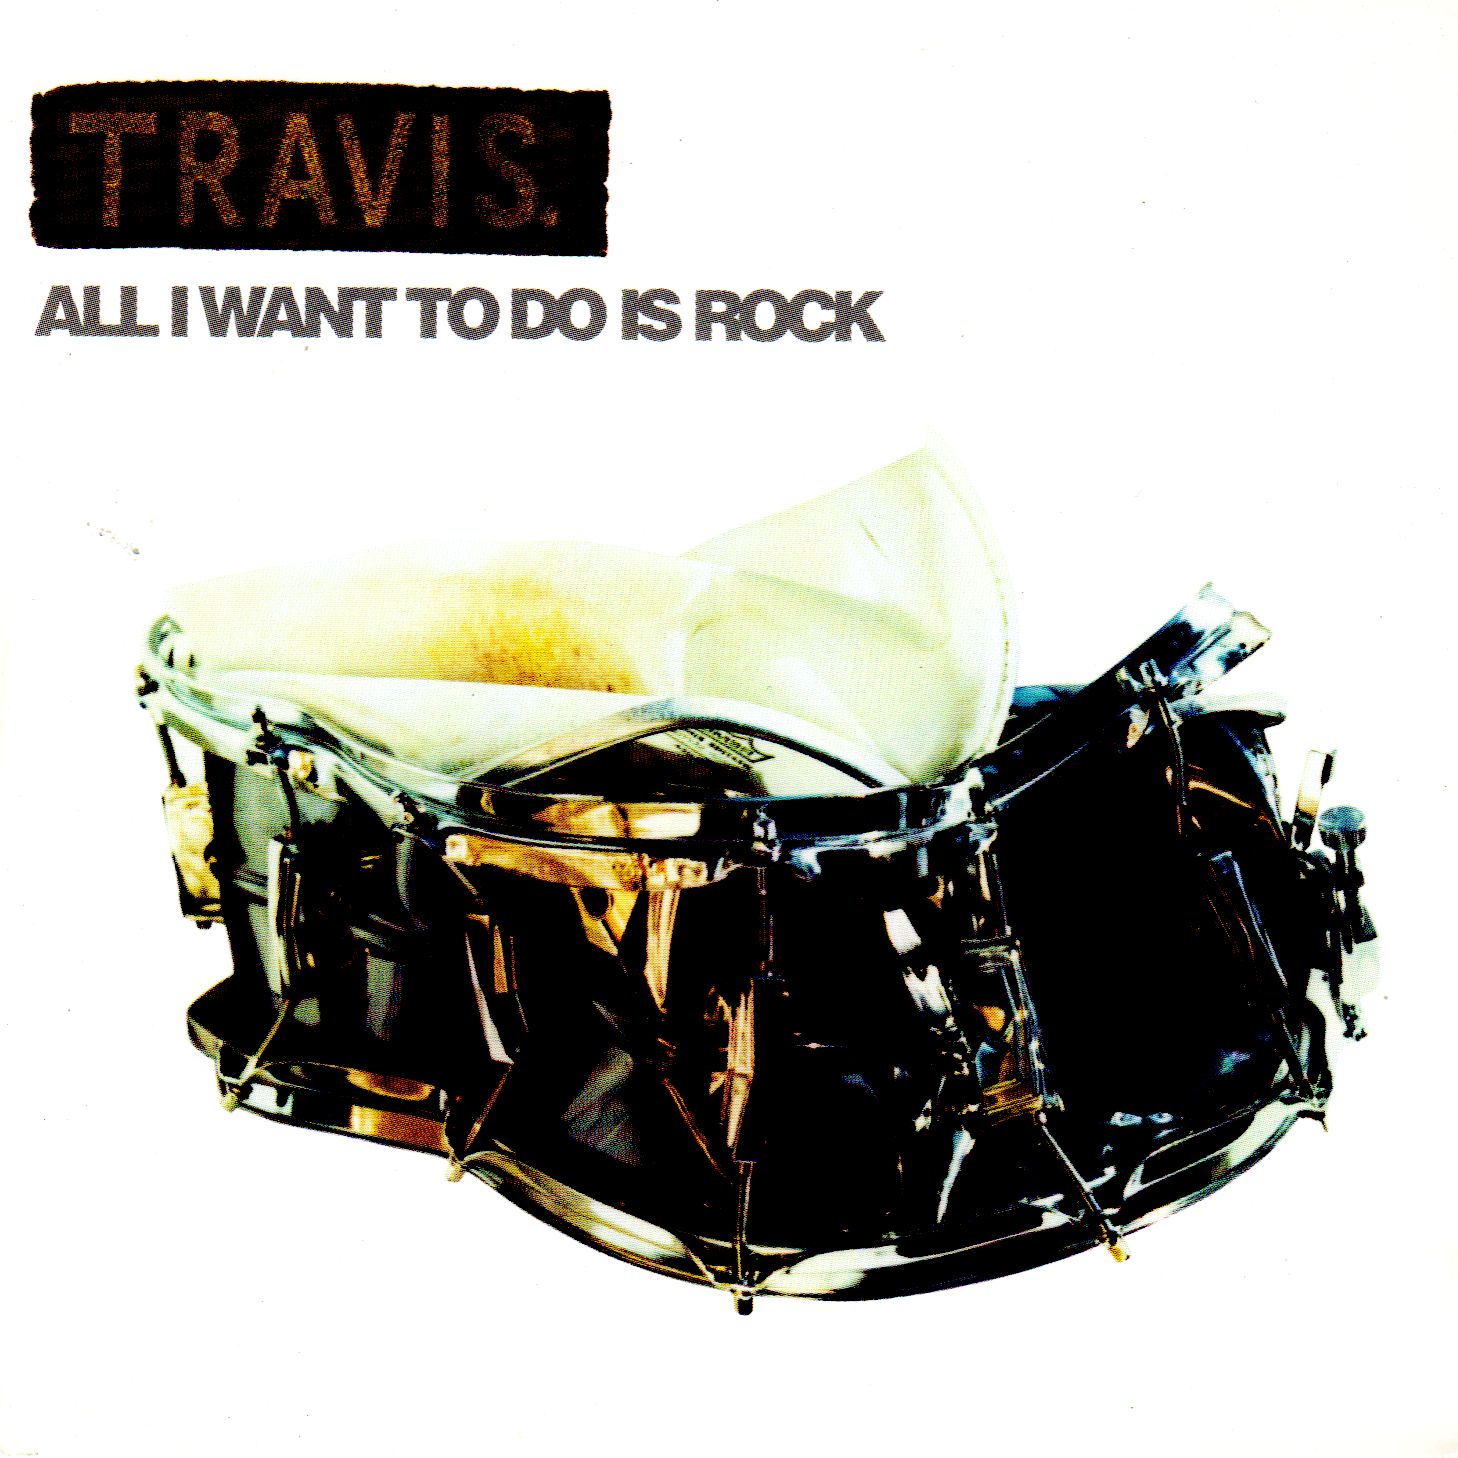 All I want to do is rock 